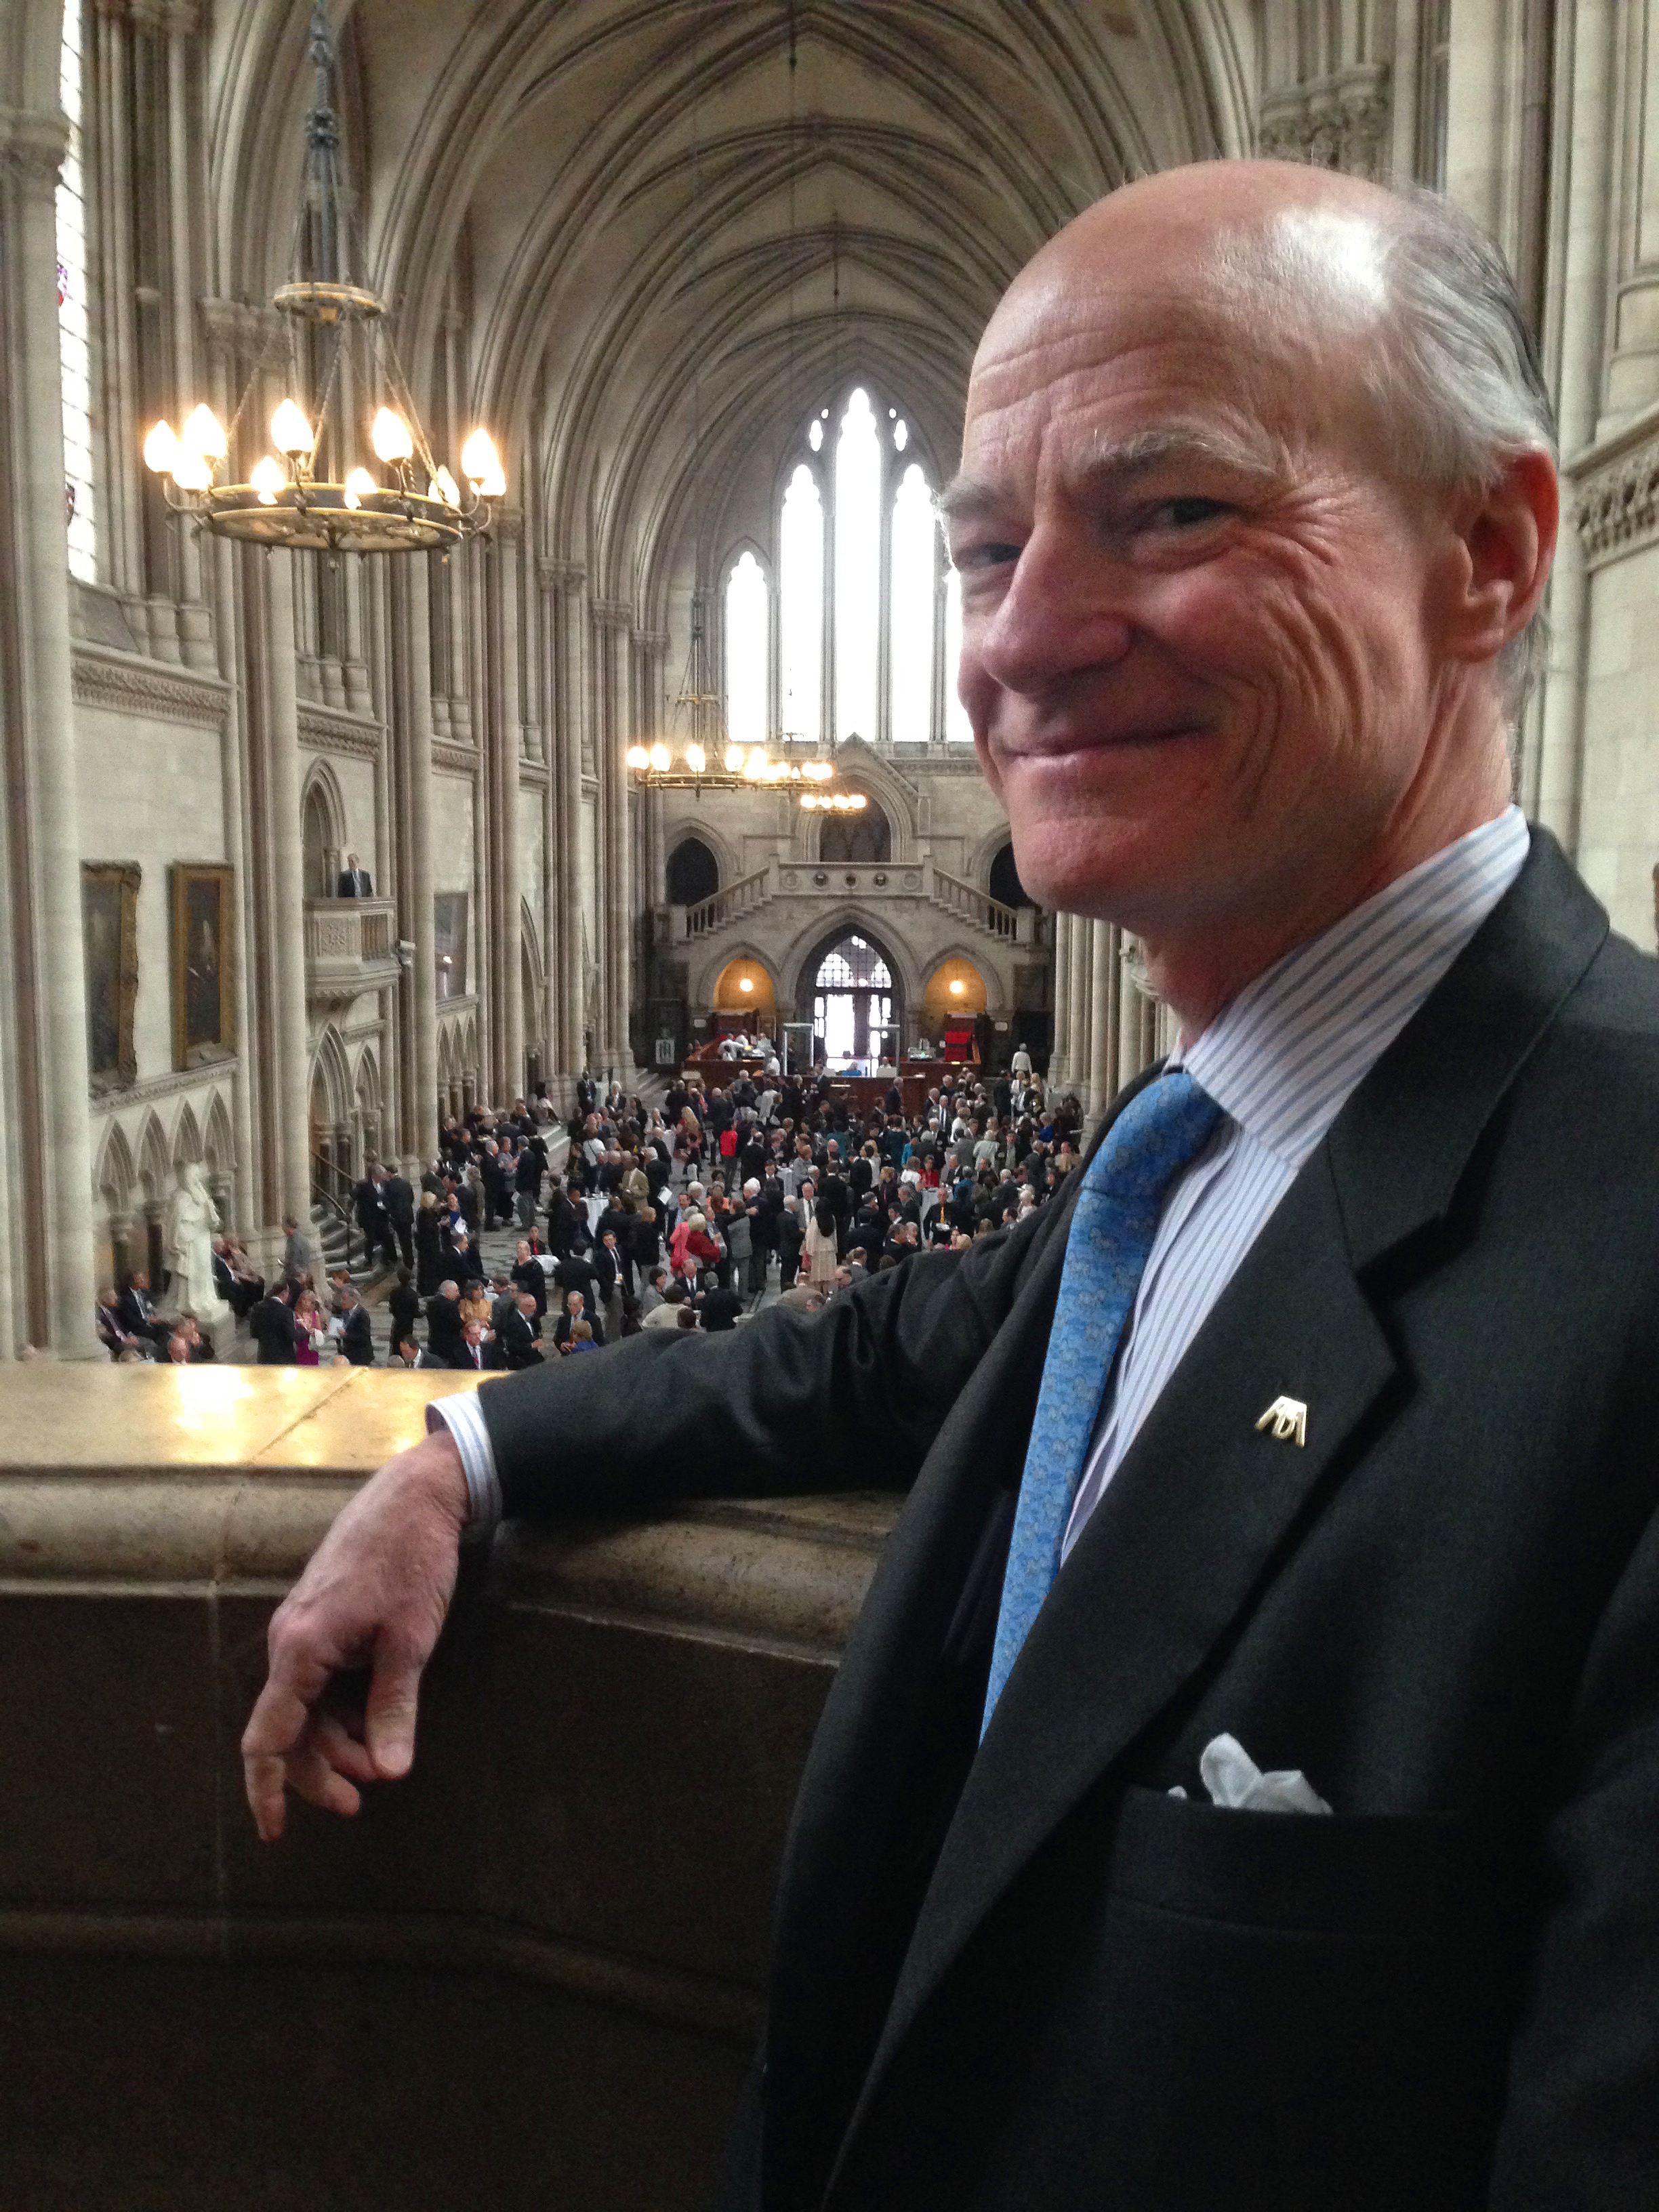 William spoke at The Royal Courts of Justice in London, June 2015, in celebration of the 800th anniversary of Magna Carta.